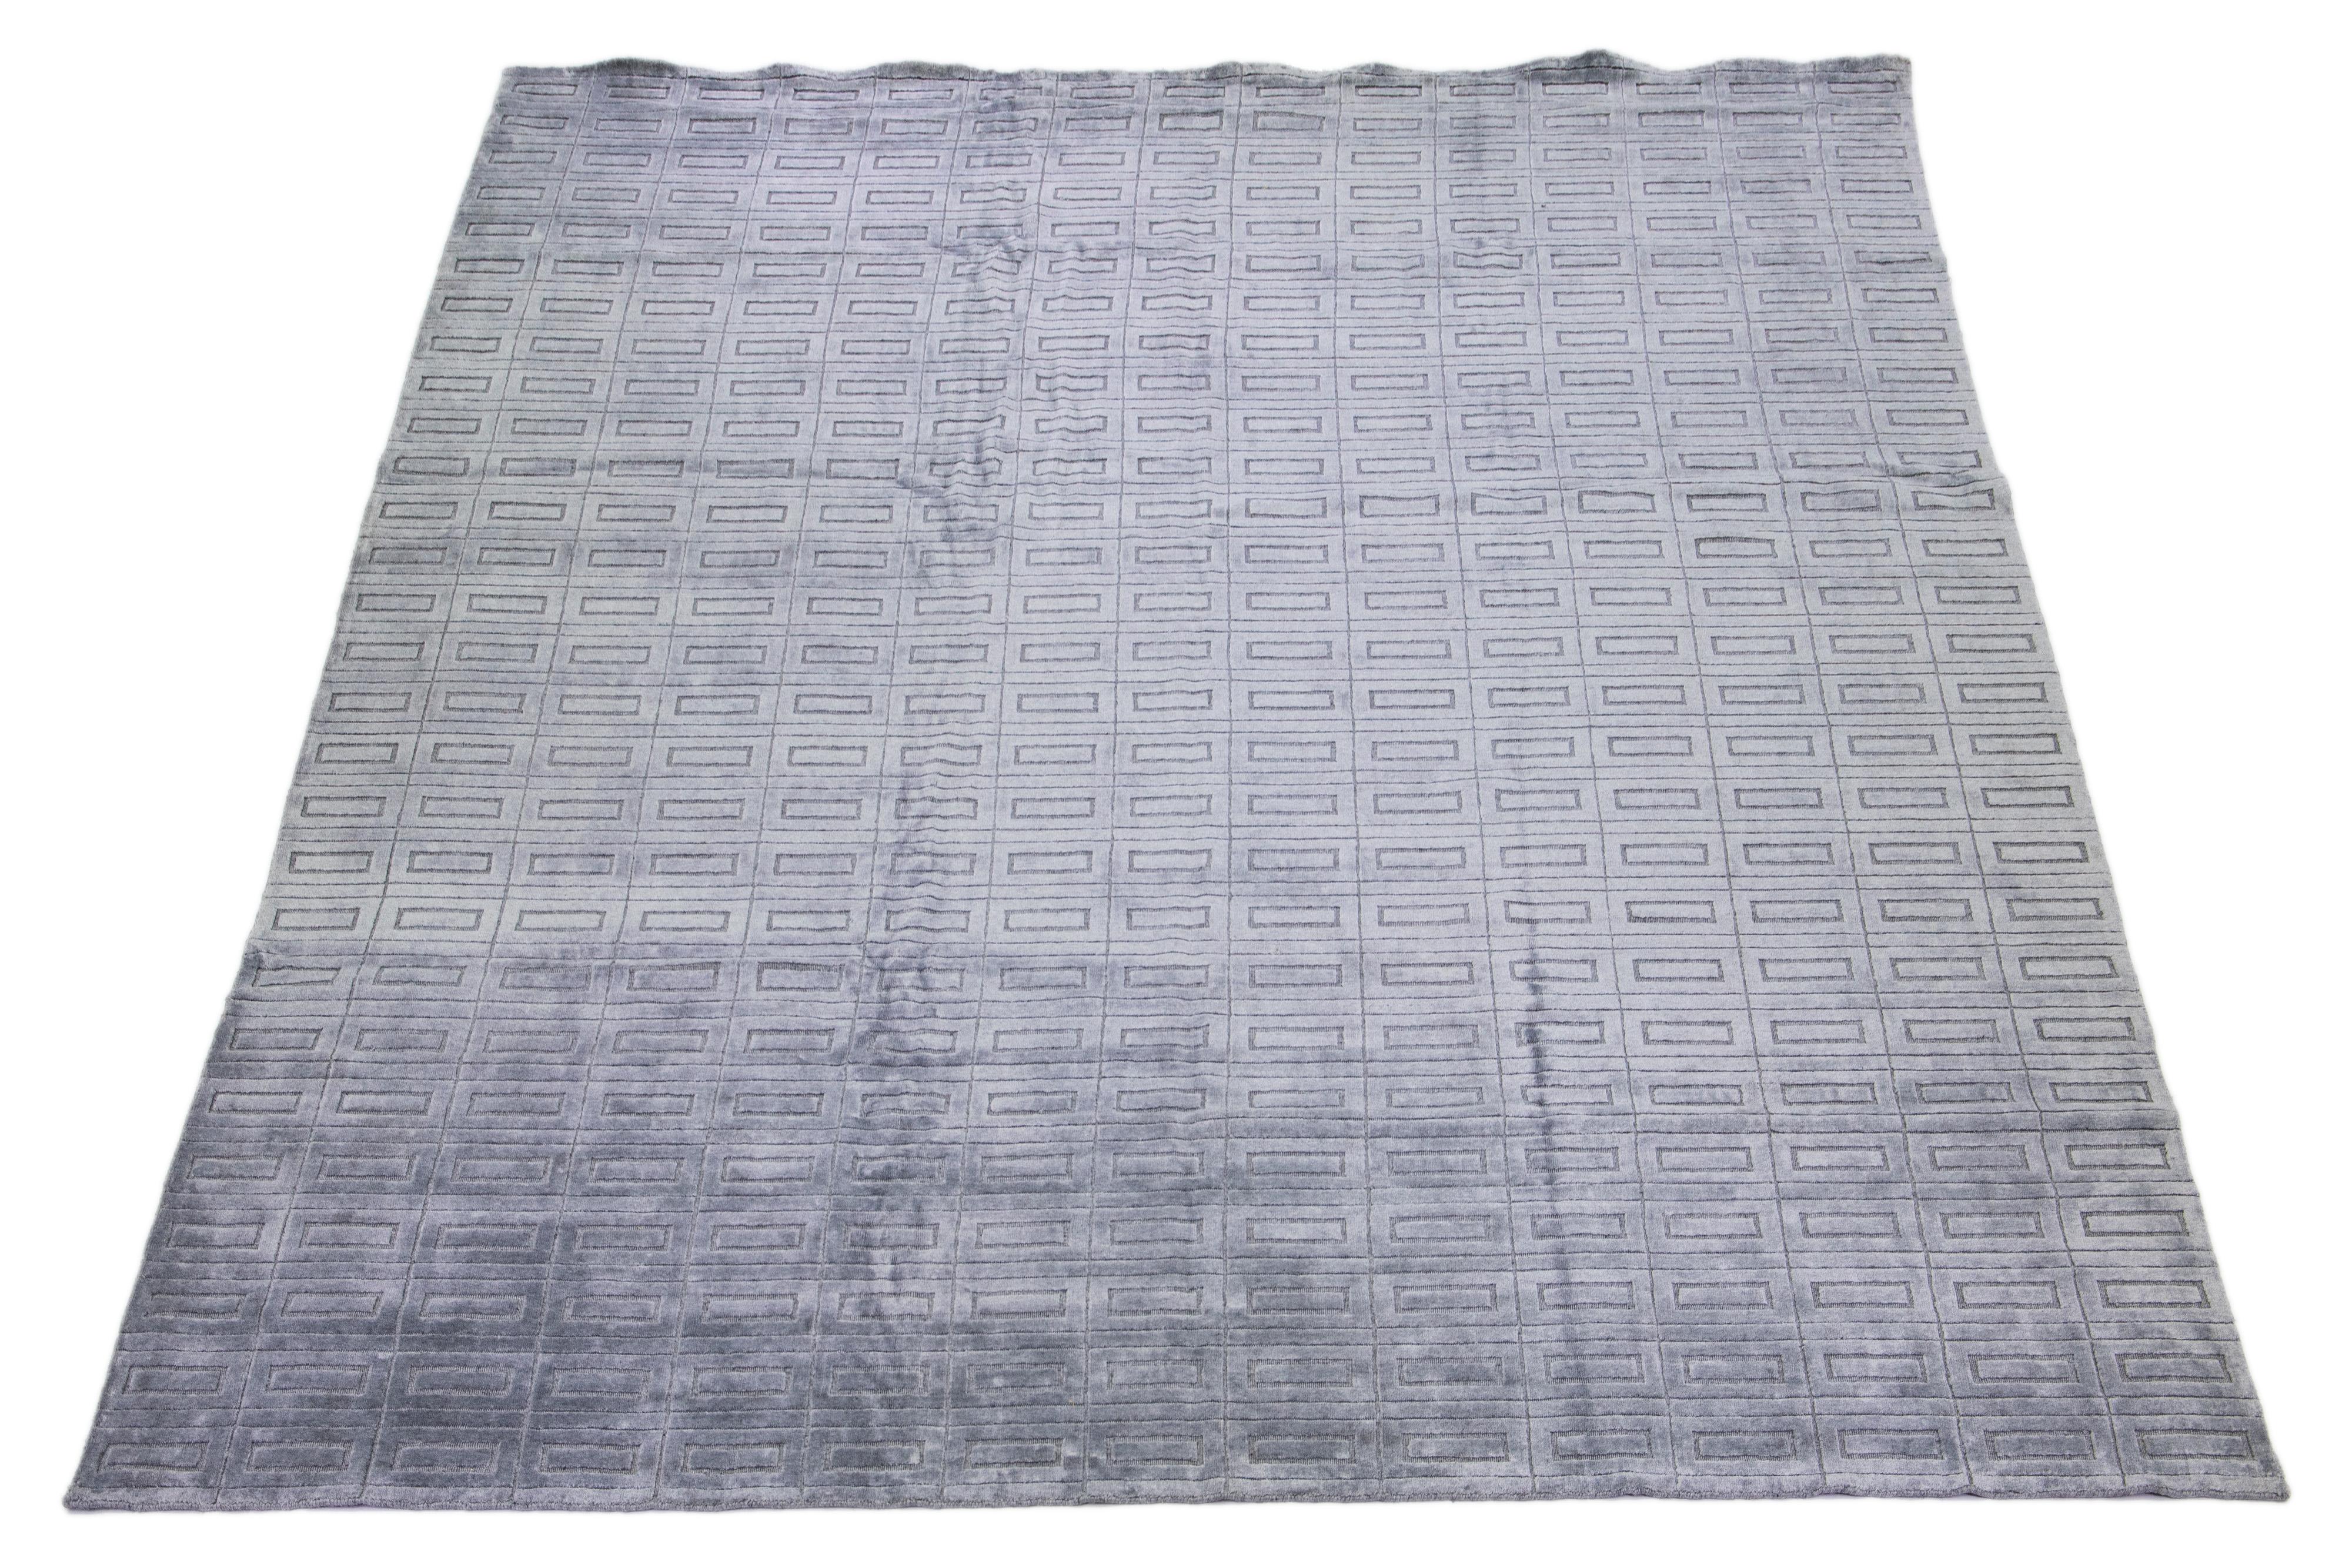 Beautiful modern Ikat hand-knotted wool rug with a gray-silver color field. This piece has a gorgeous all-over geometric pattern design.

This rug measures: 12'1